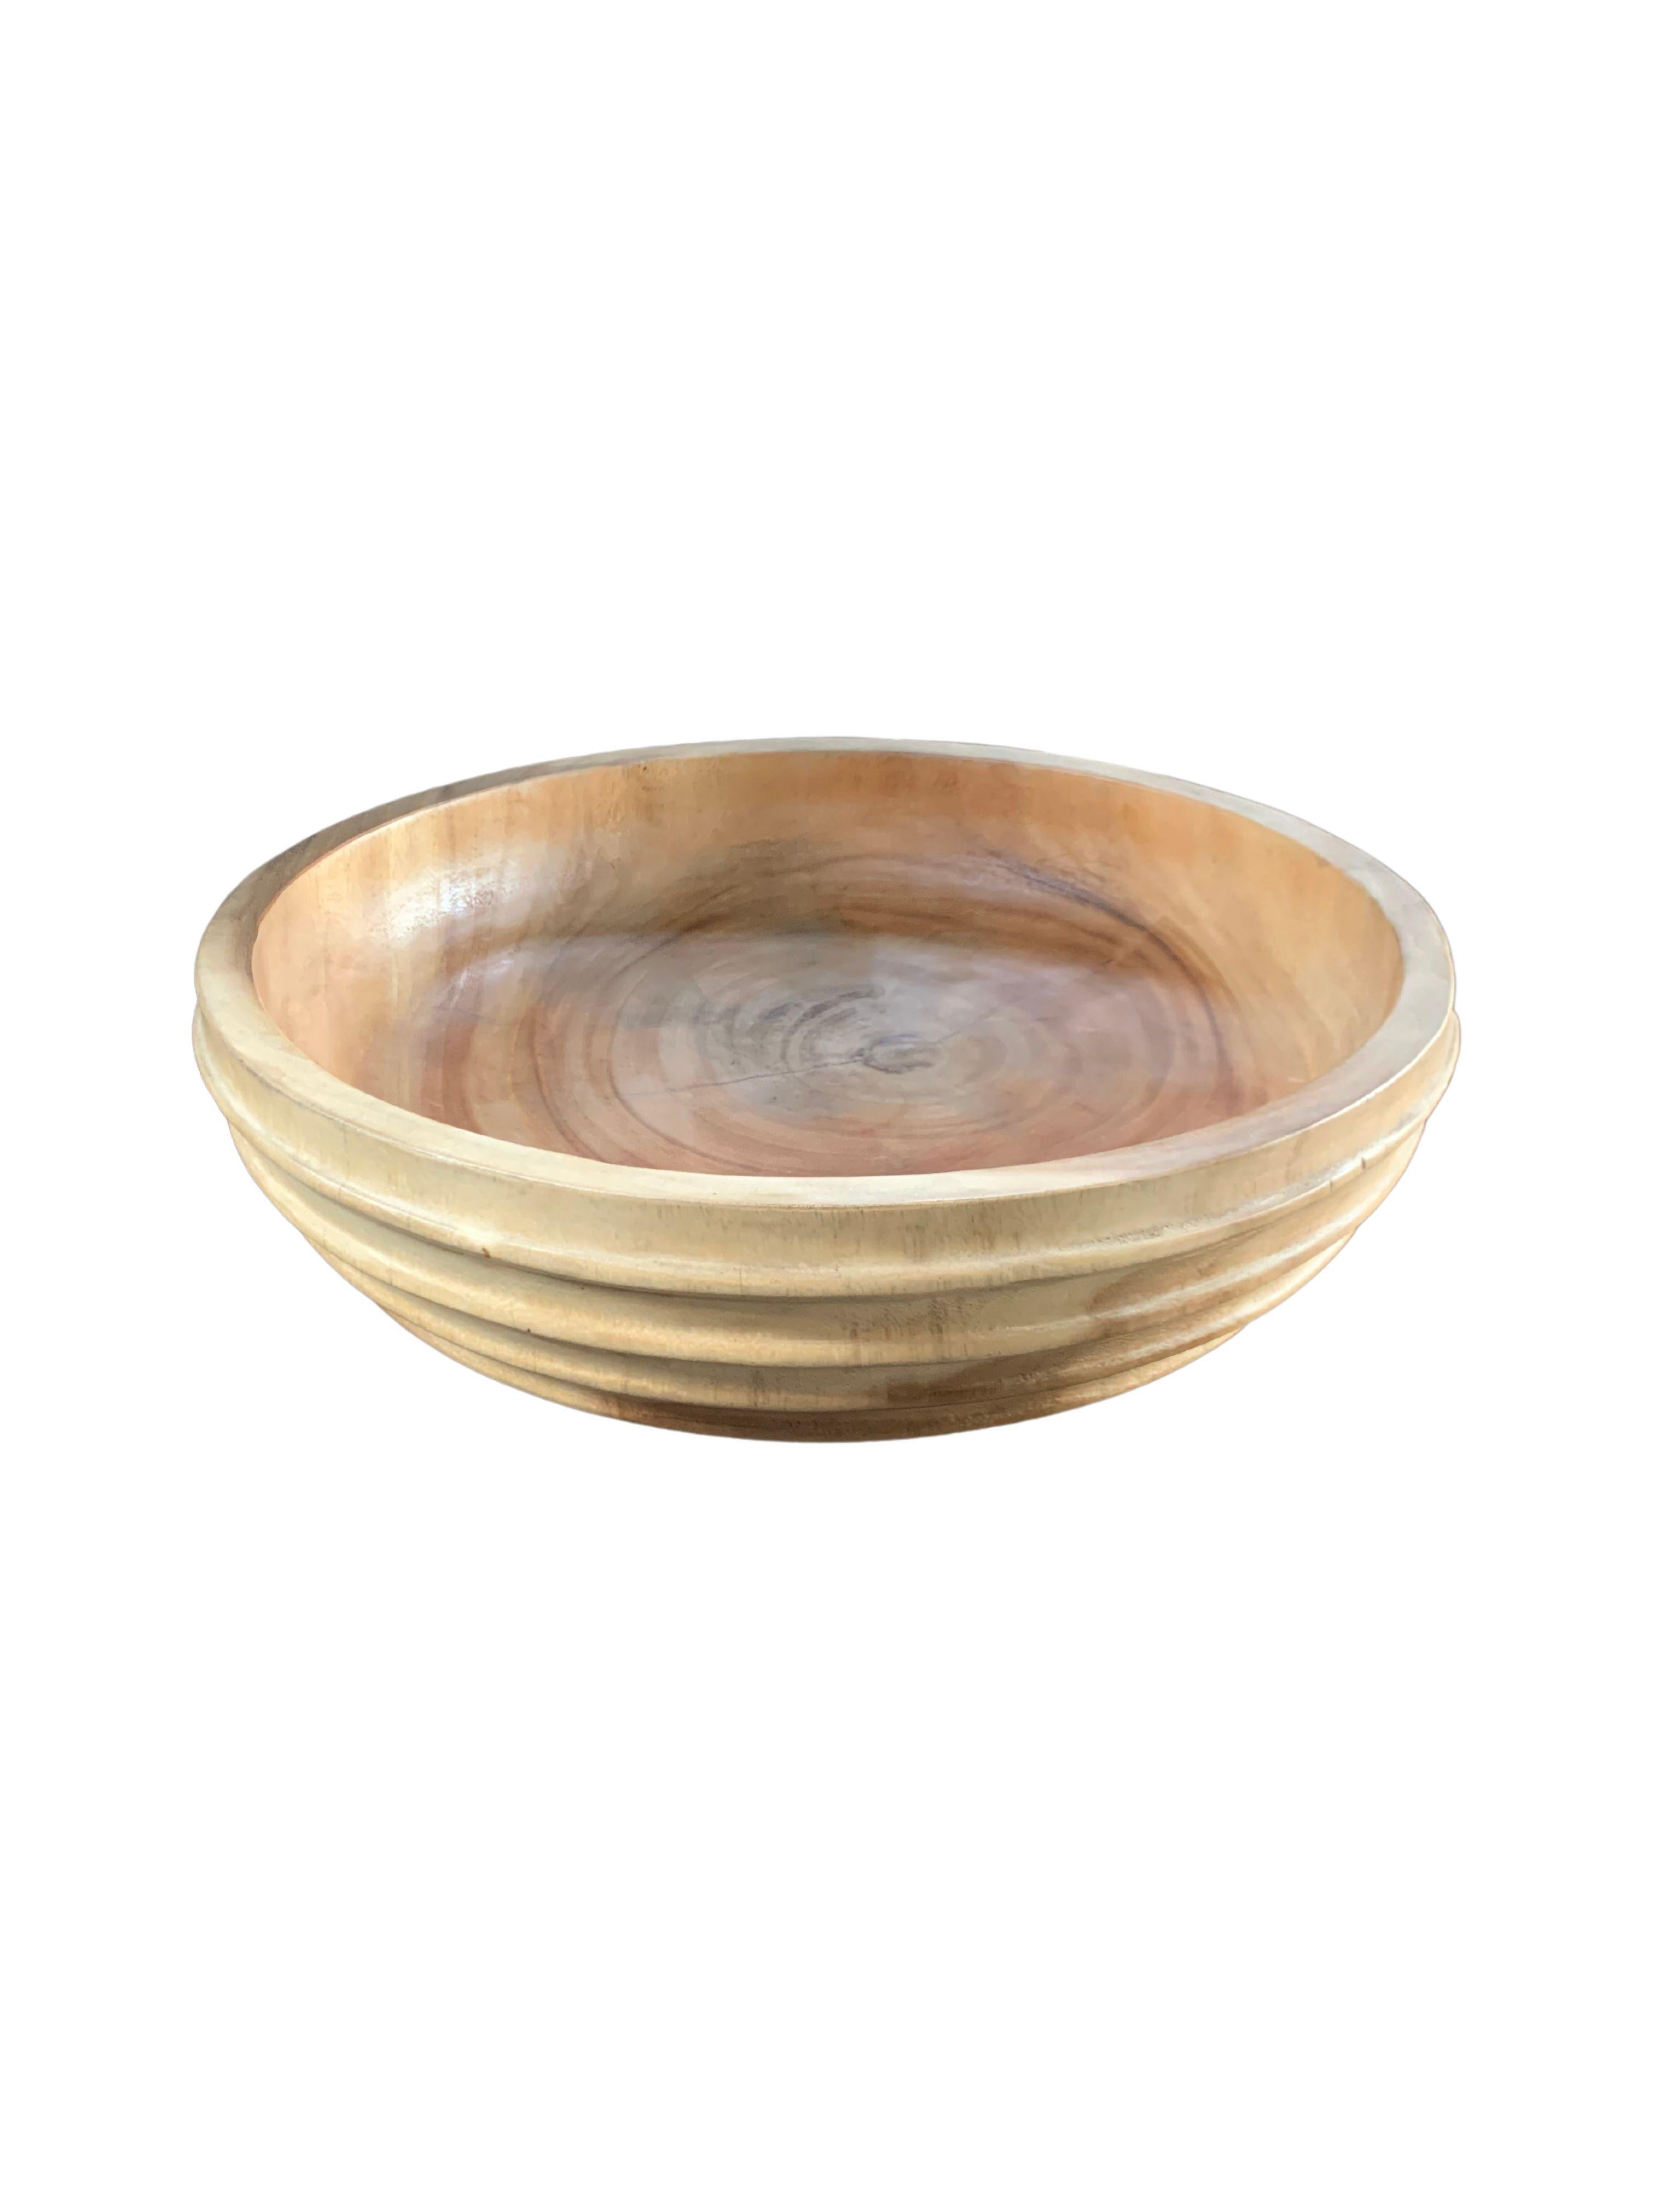 A hand-crafted mango wood bowl. The bowl was cut from a much larger slab of mango wood and features a ribbed texture on its sides. The bowl has been meticulously sanded down to achieve a wonderful smooth texture. The bowl is then completed with a